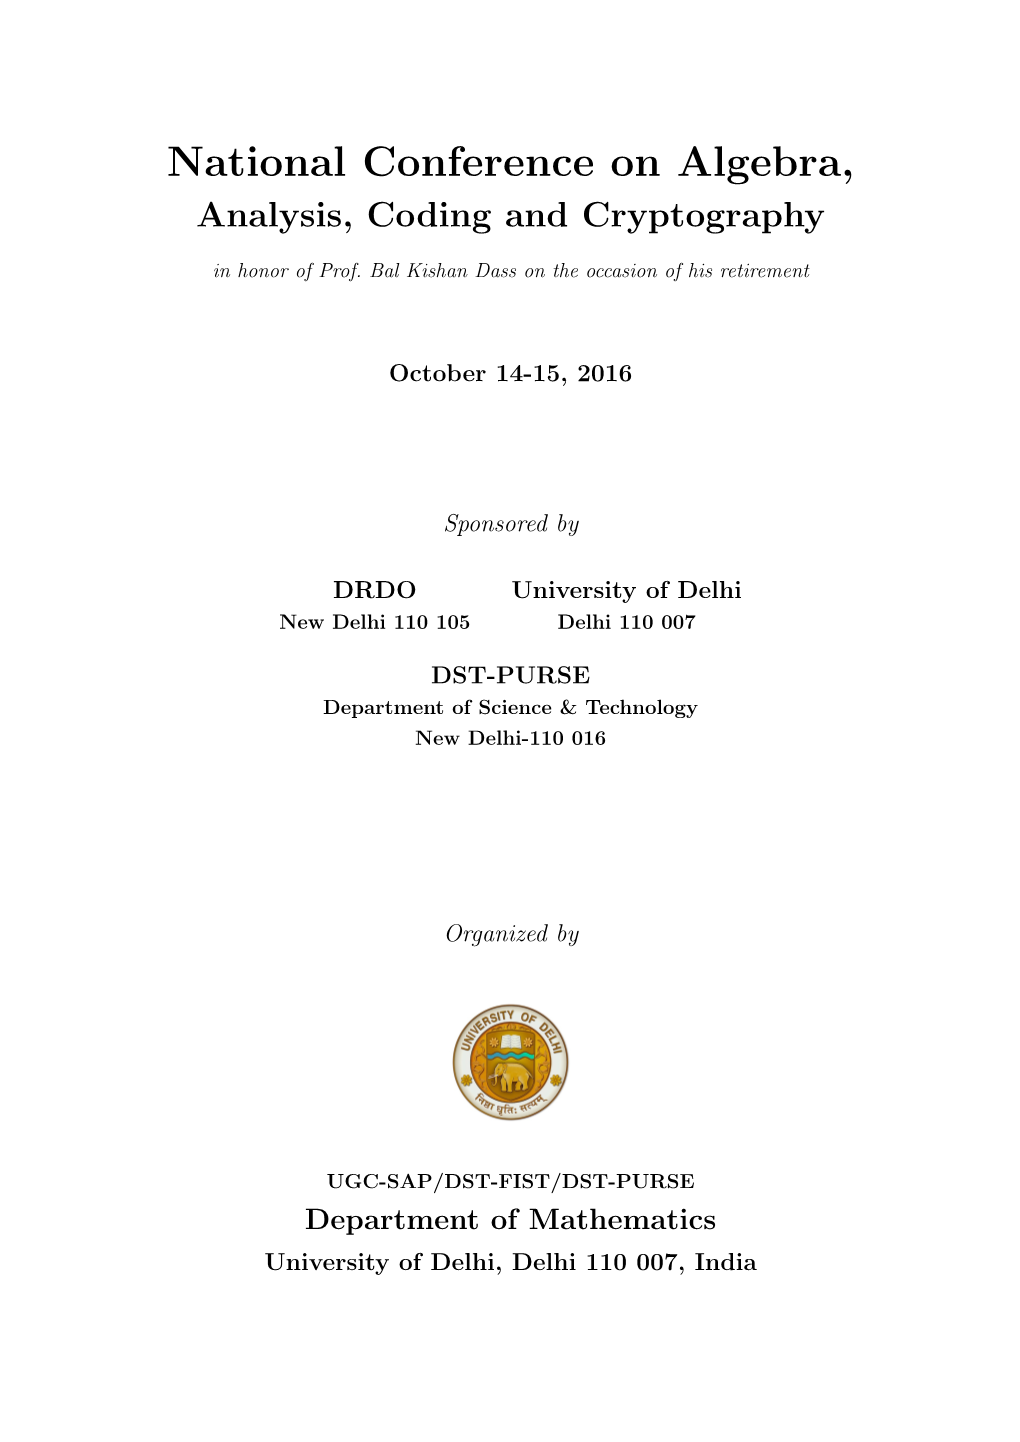 National Conference on Algebra, Analysis, Coding and Cryptography